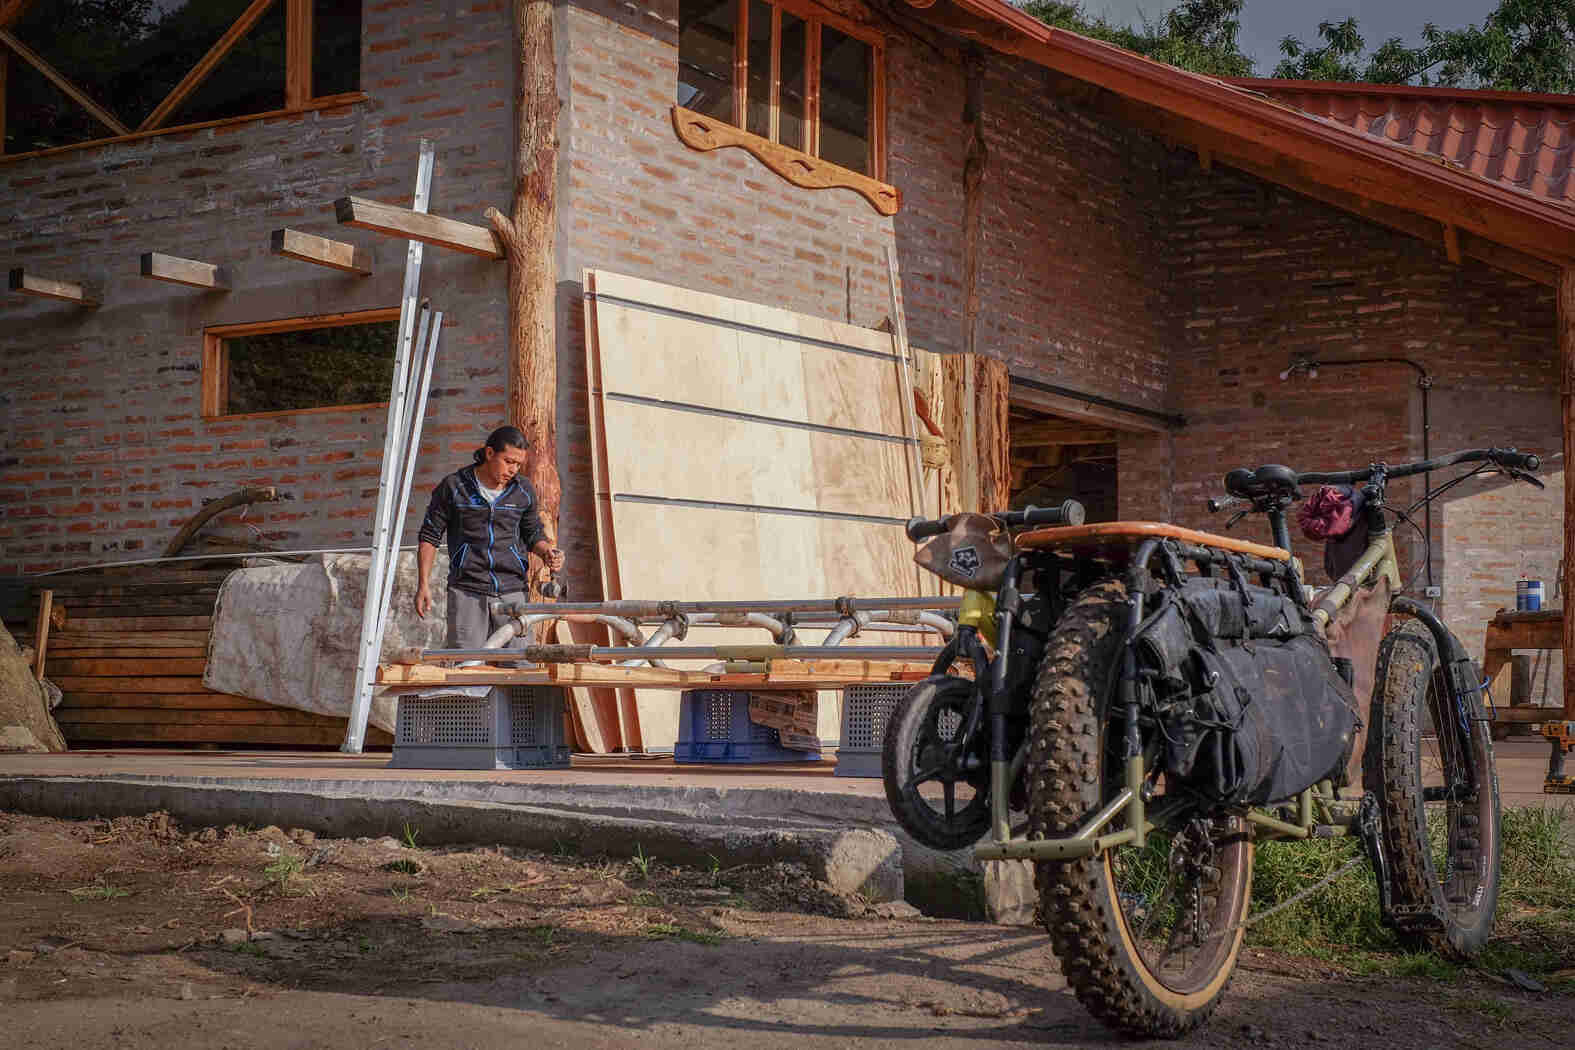 Rear ride side view of a Surly Big Fat Dummy bike, with a people building a structure in front of a brick house